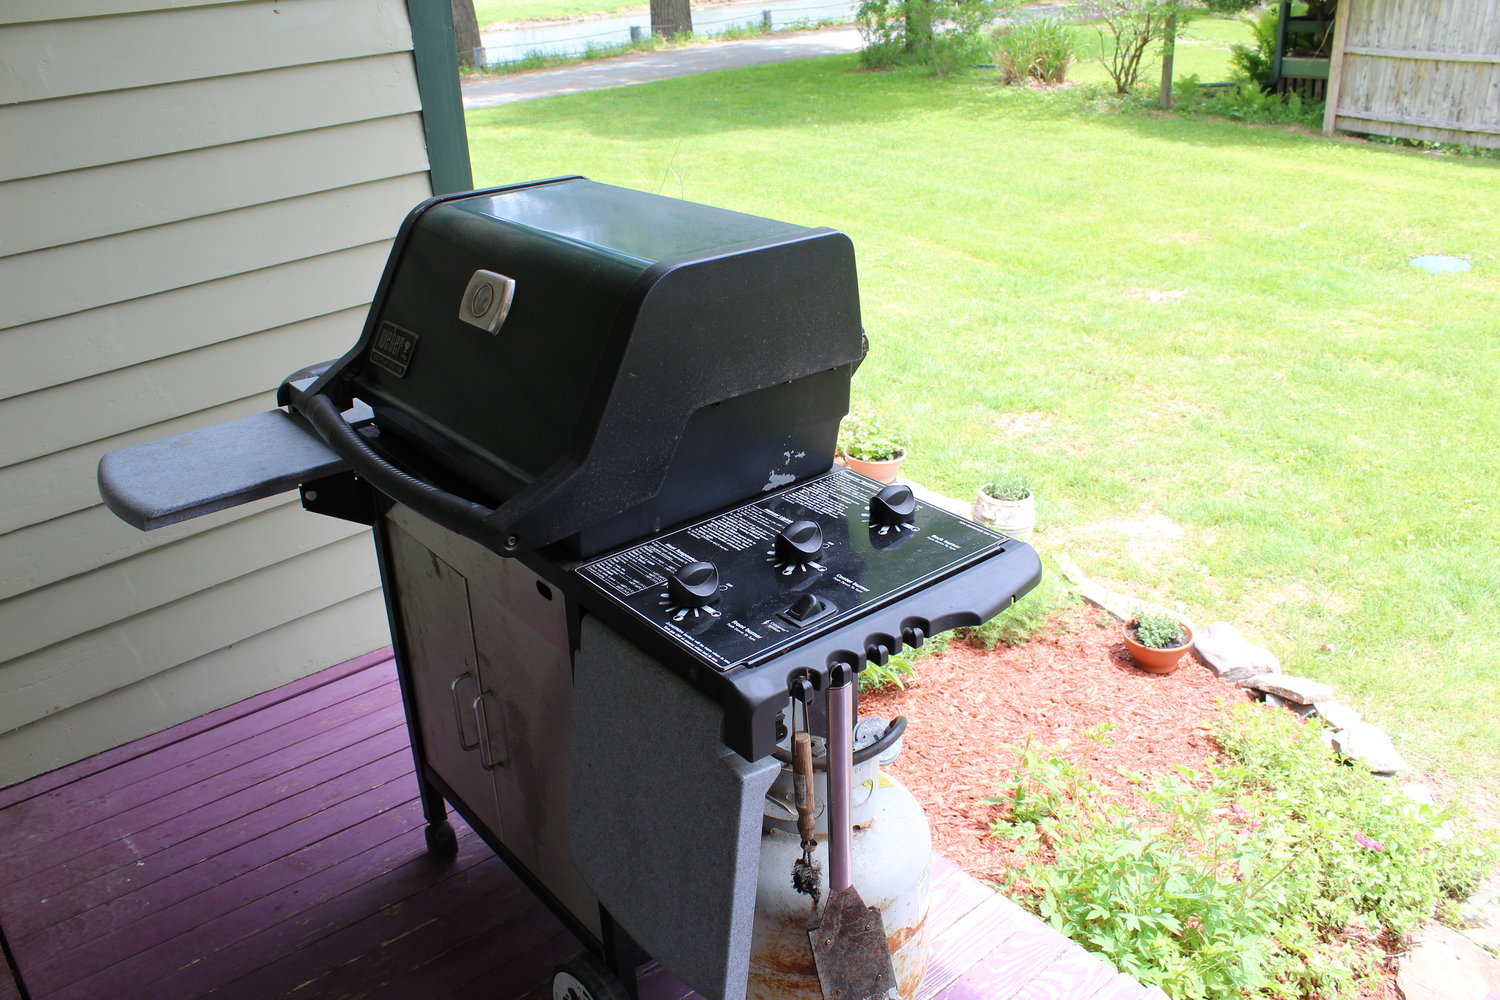 A grill at home in Pennsylvania, just waiting for a post-lockdown barbeque or Father’s Day meal.